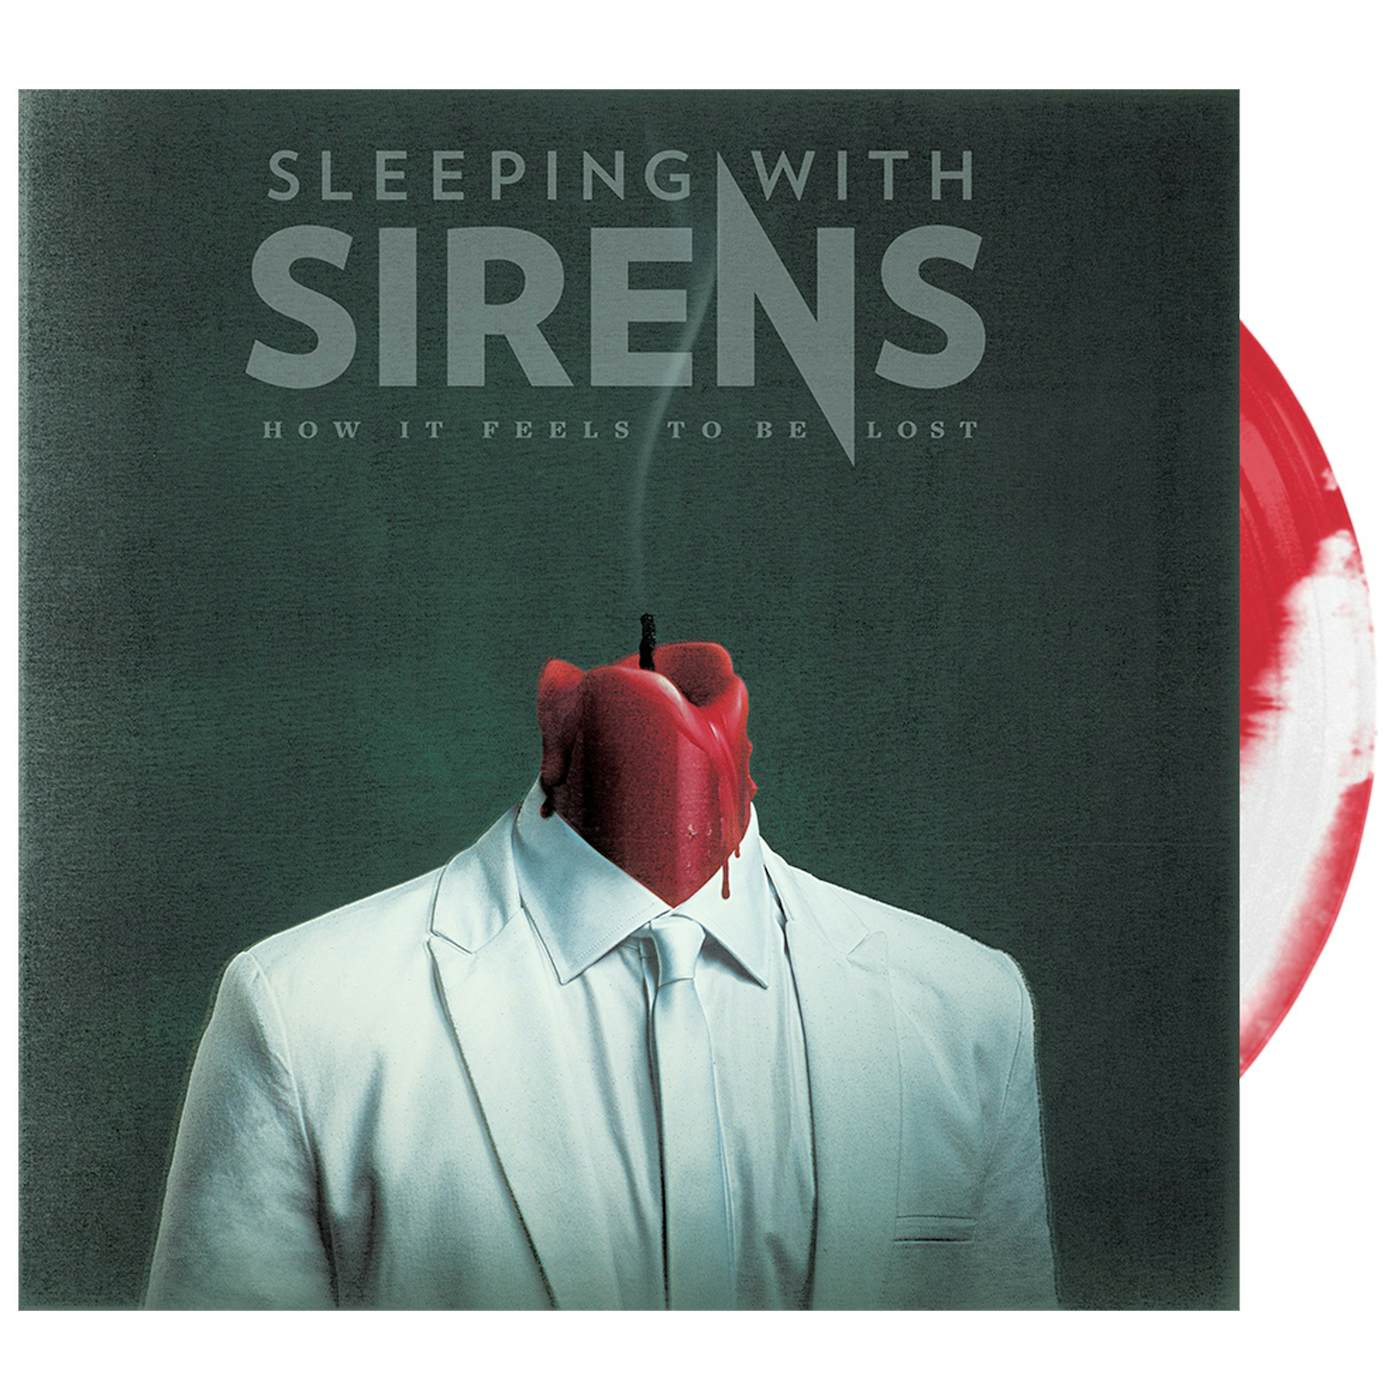 Sleeping With Sirens - 'How It Feels to Be Lost' Neon Red / White Side AB Vinyl